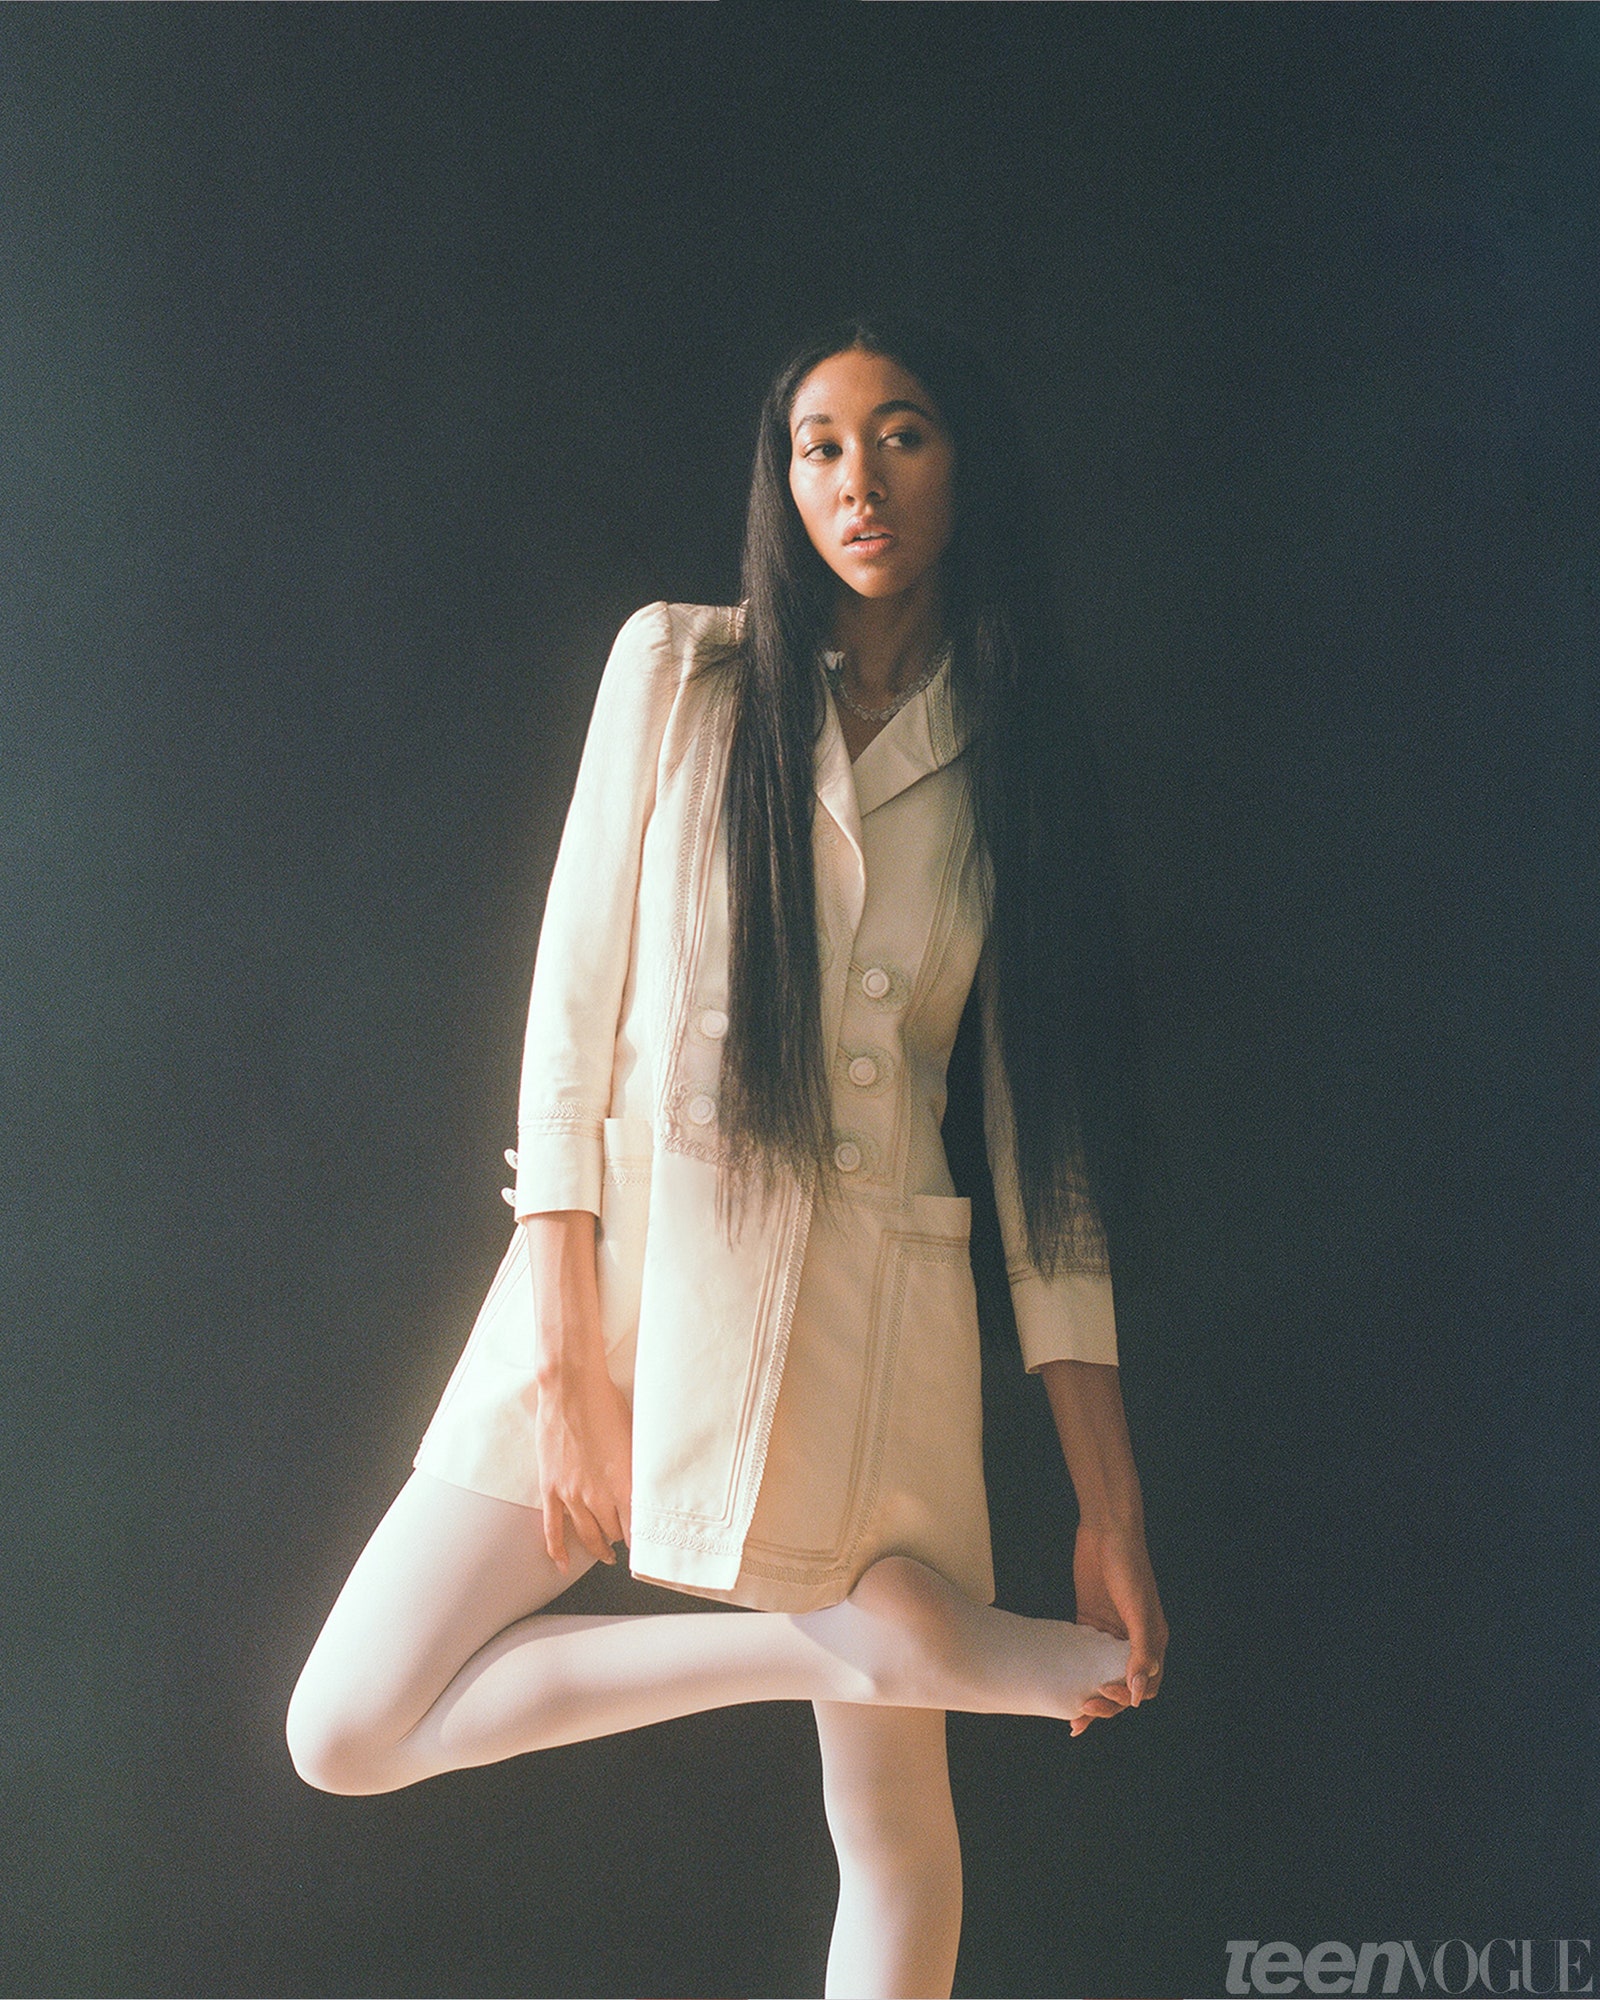 Aoki Lee Simmons standing in white dress holding her foot.